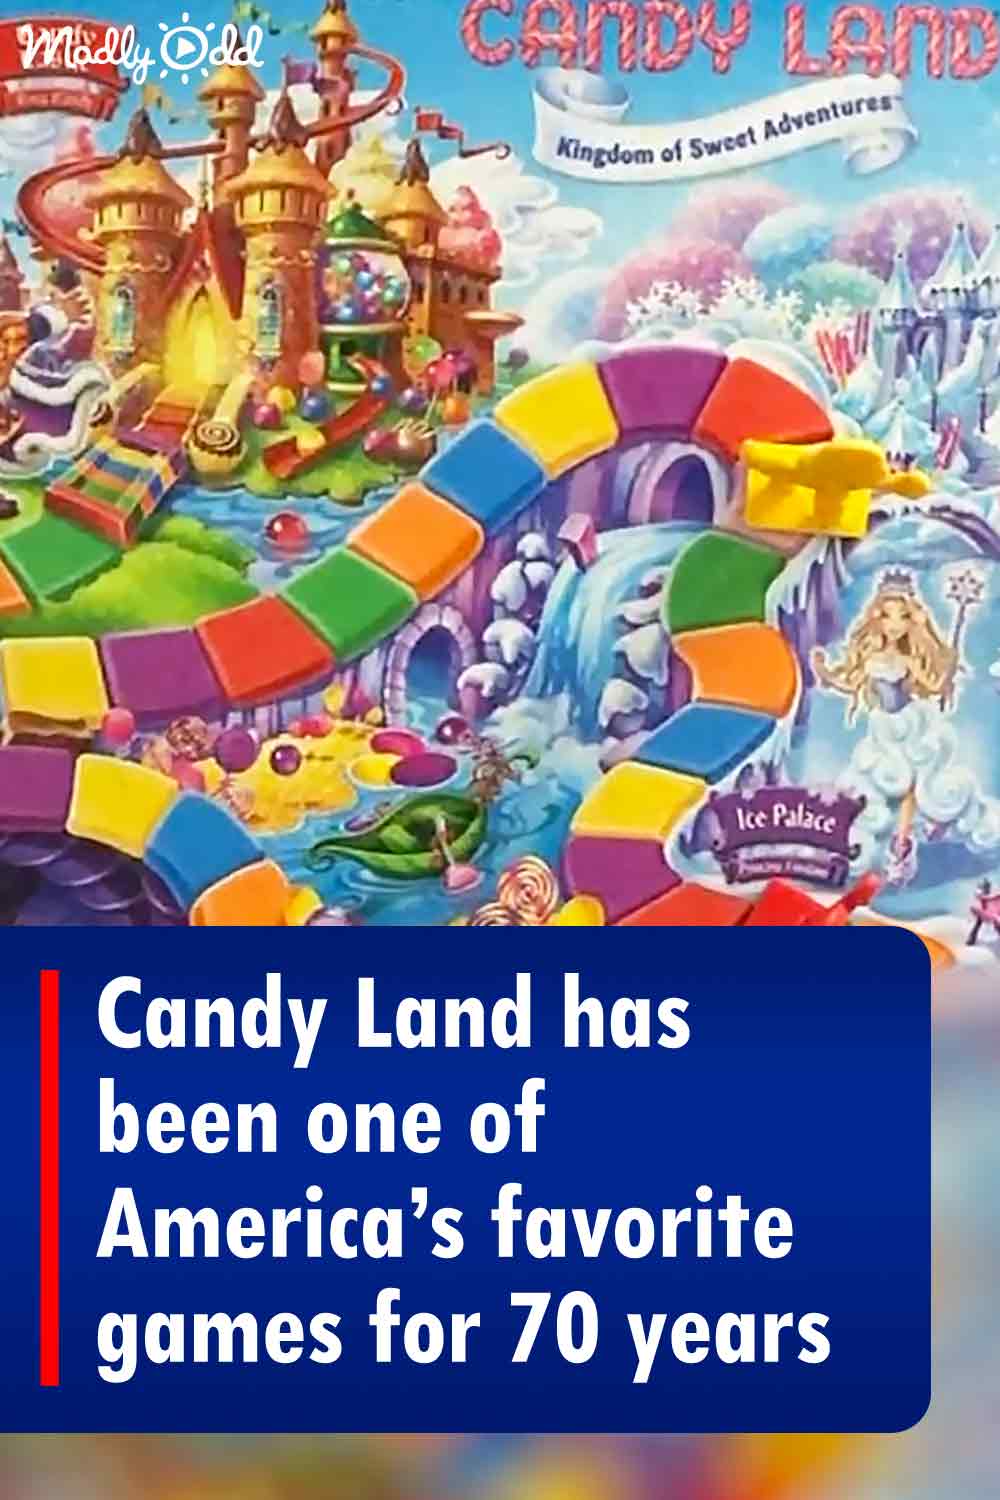 Candy Land has been one of America’s favorite games for 70 years